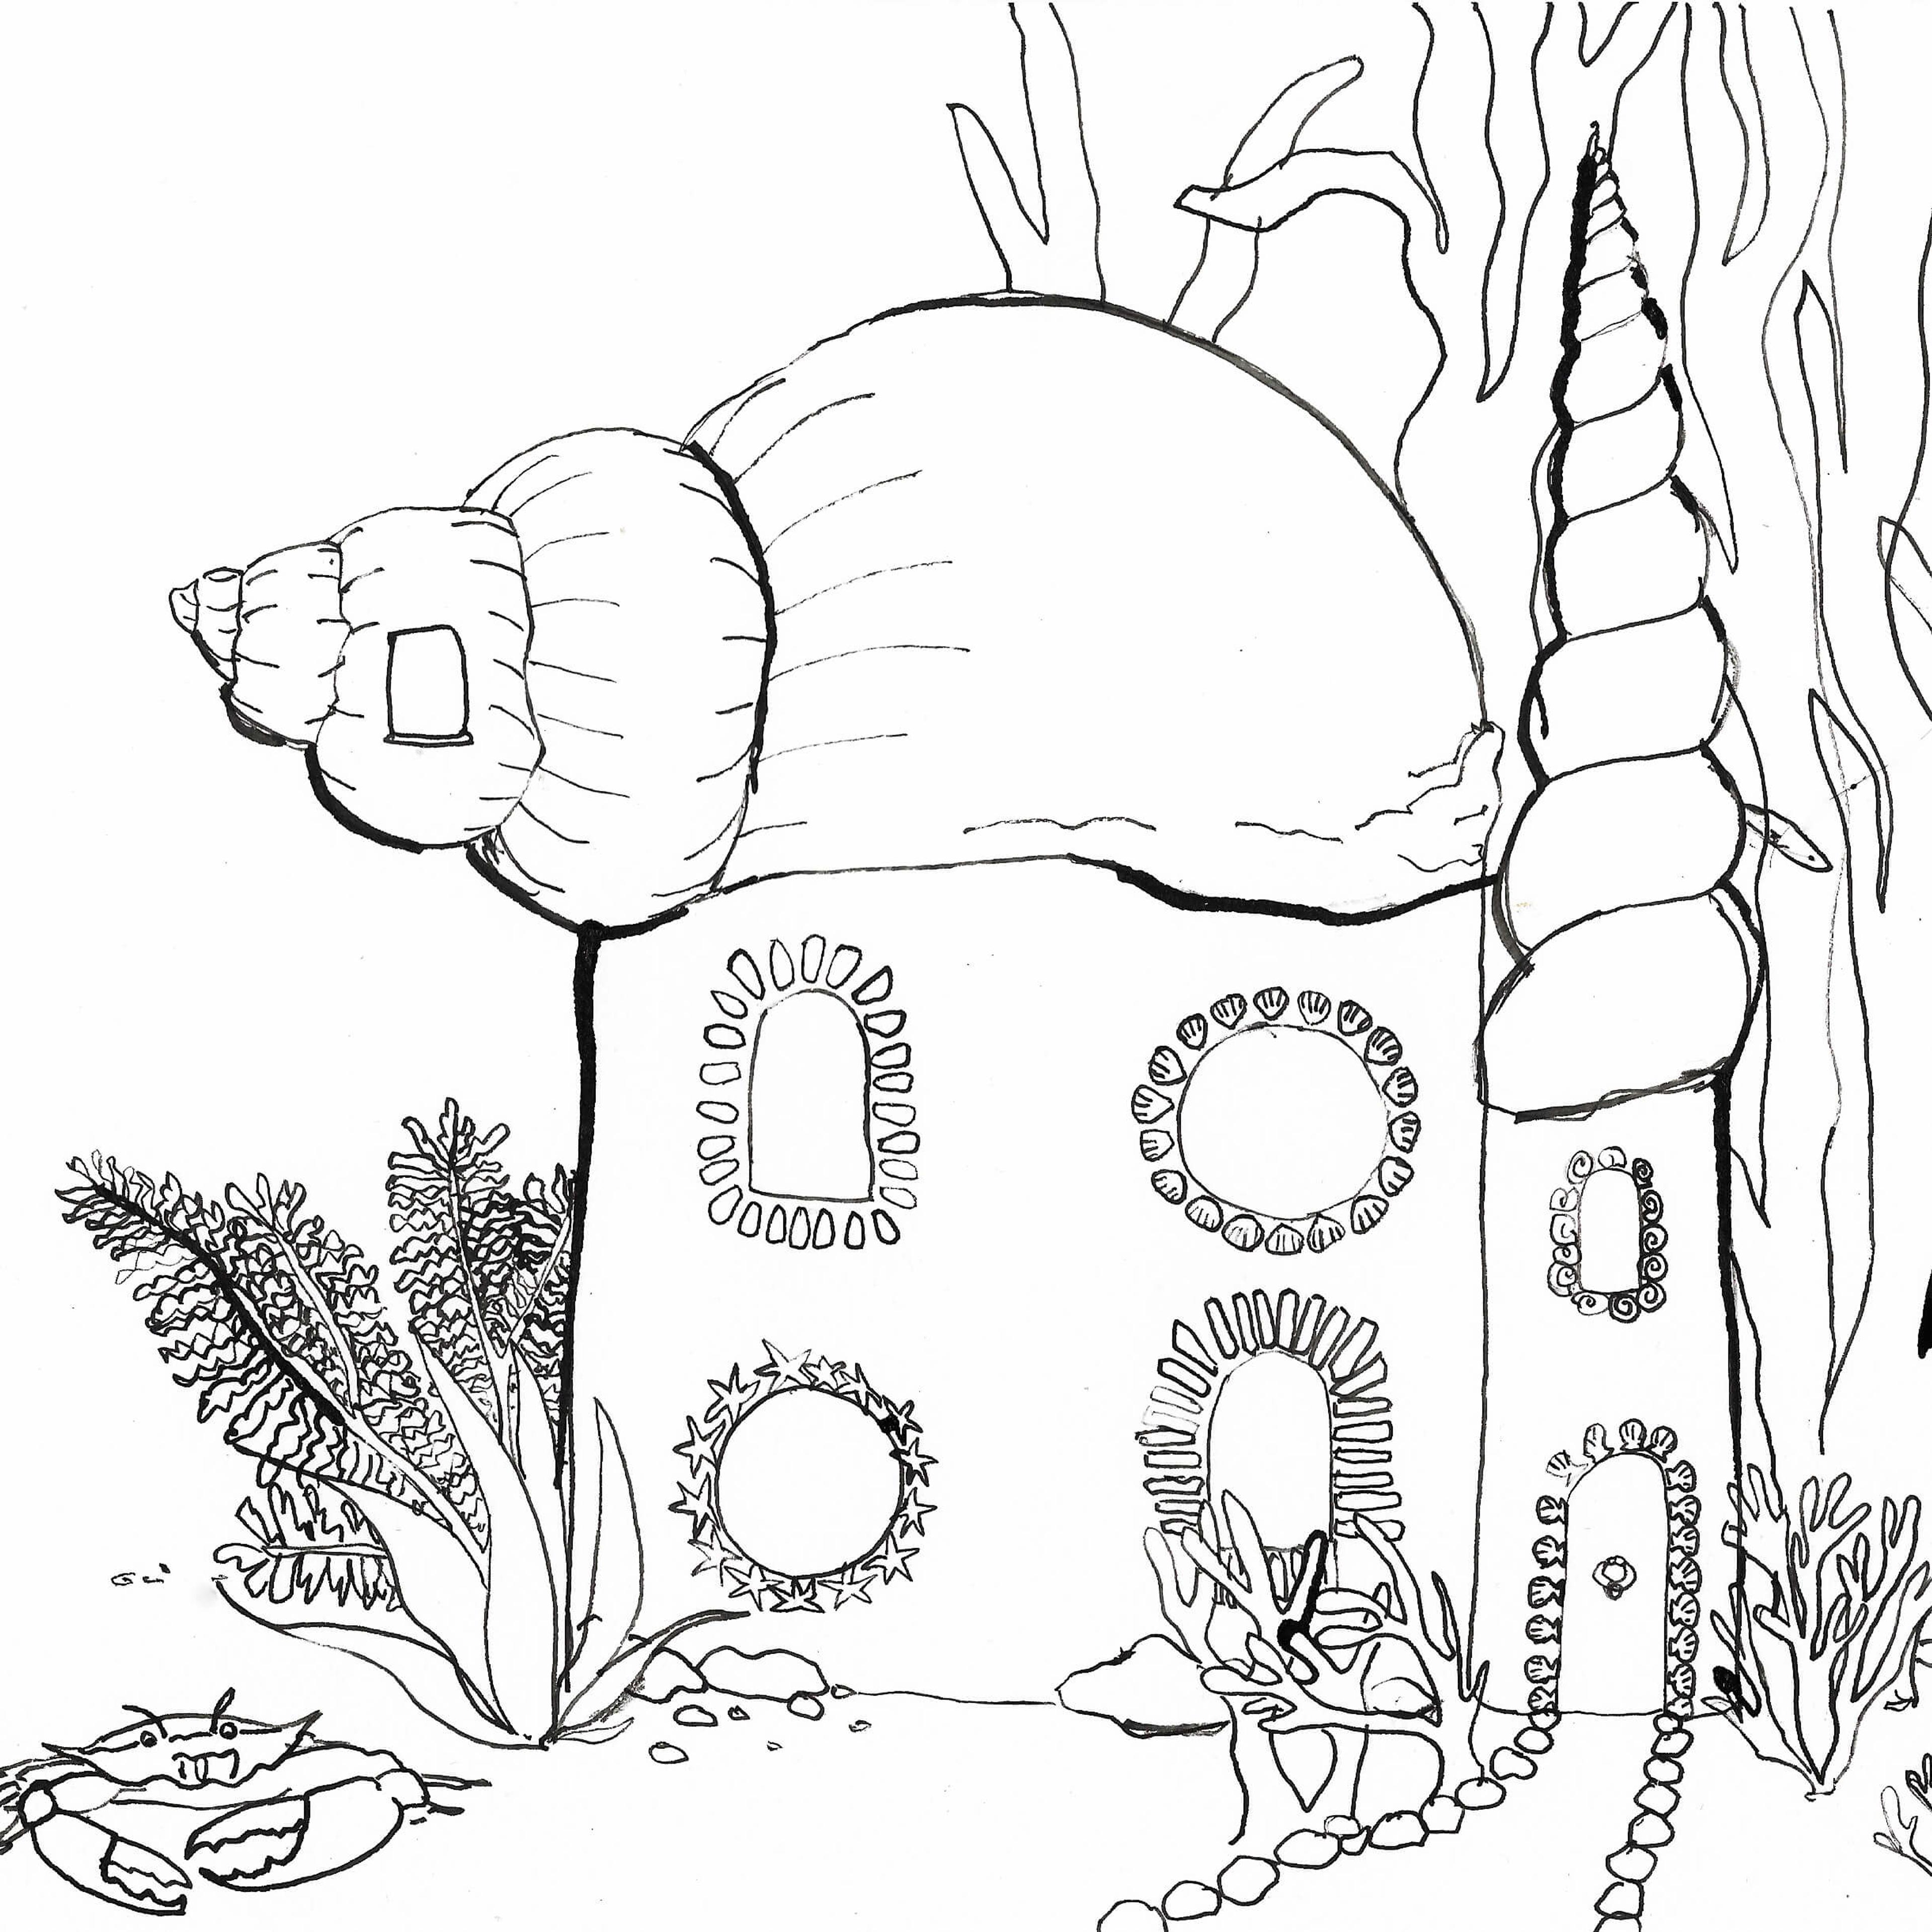 An ink illustration of a house with a conch shell as a roof, surrounded by corals